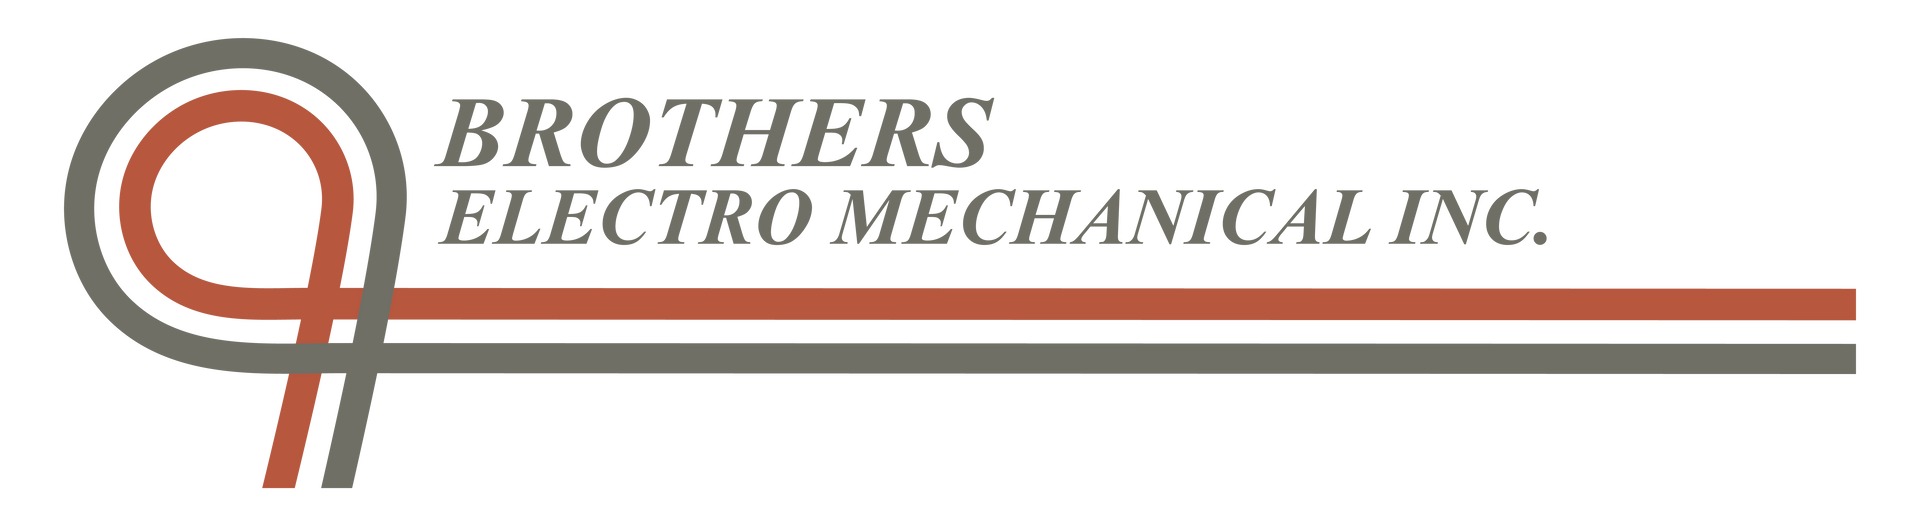 Brothers Electro Mechanical Inc.